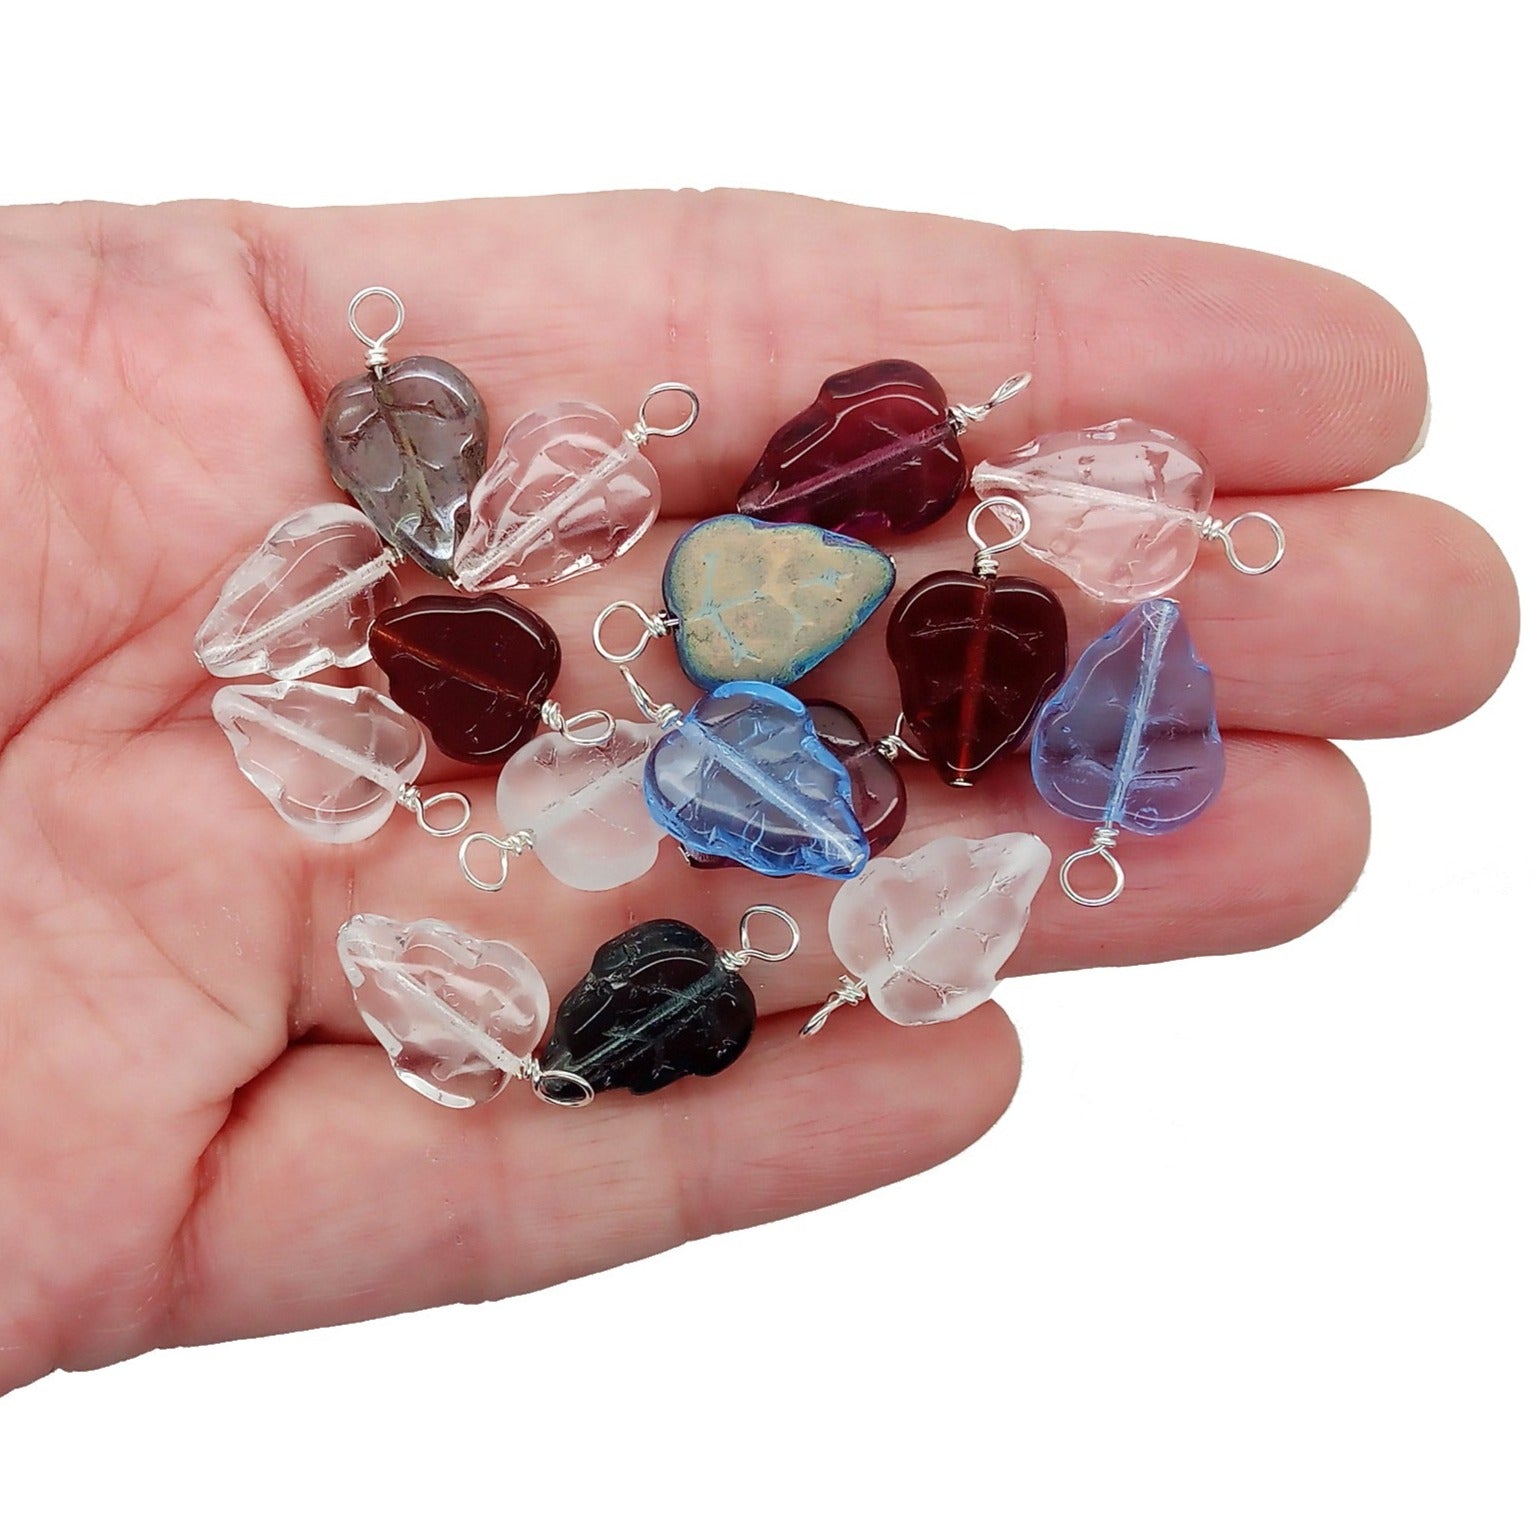 Mixed Leaf Bead Dangles, 20 pieces, Czech Glass Leaves Charms in Assorted Colors